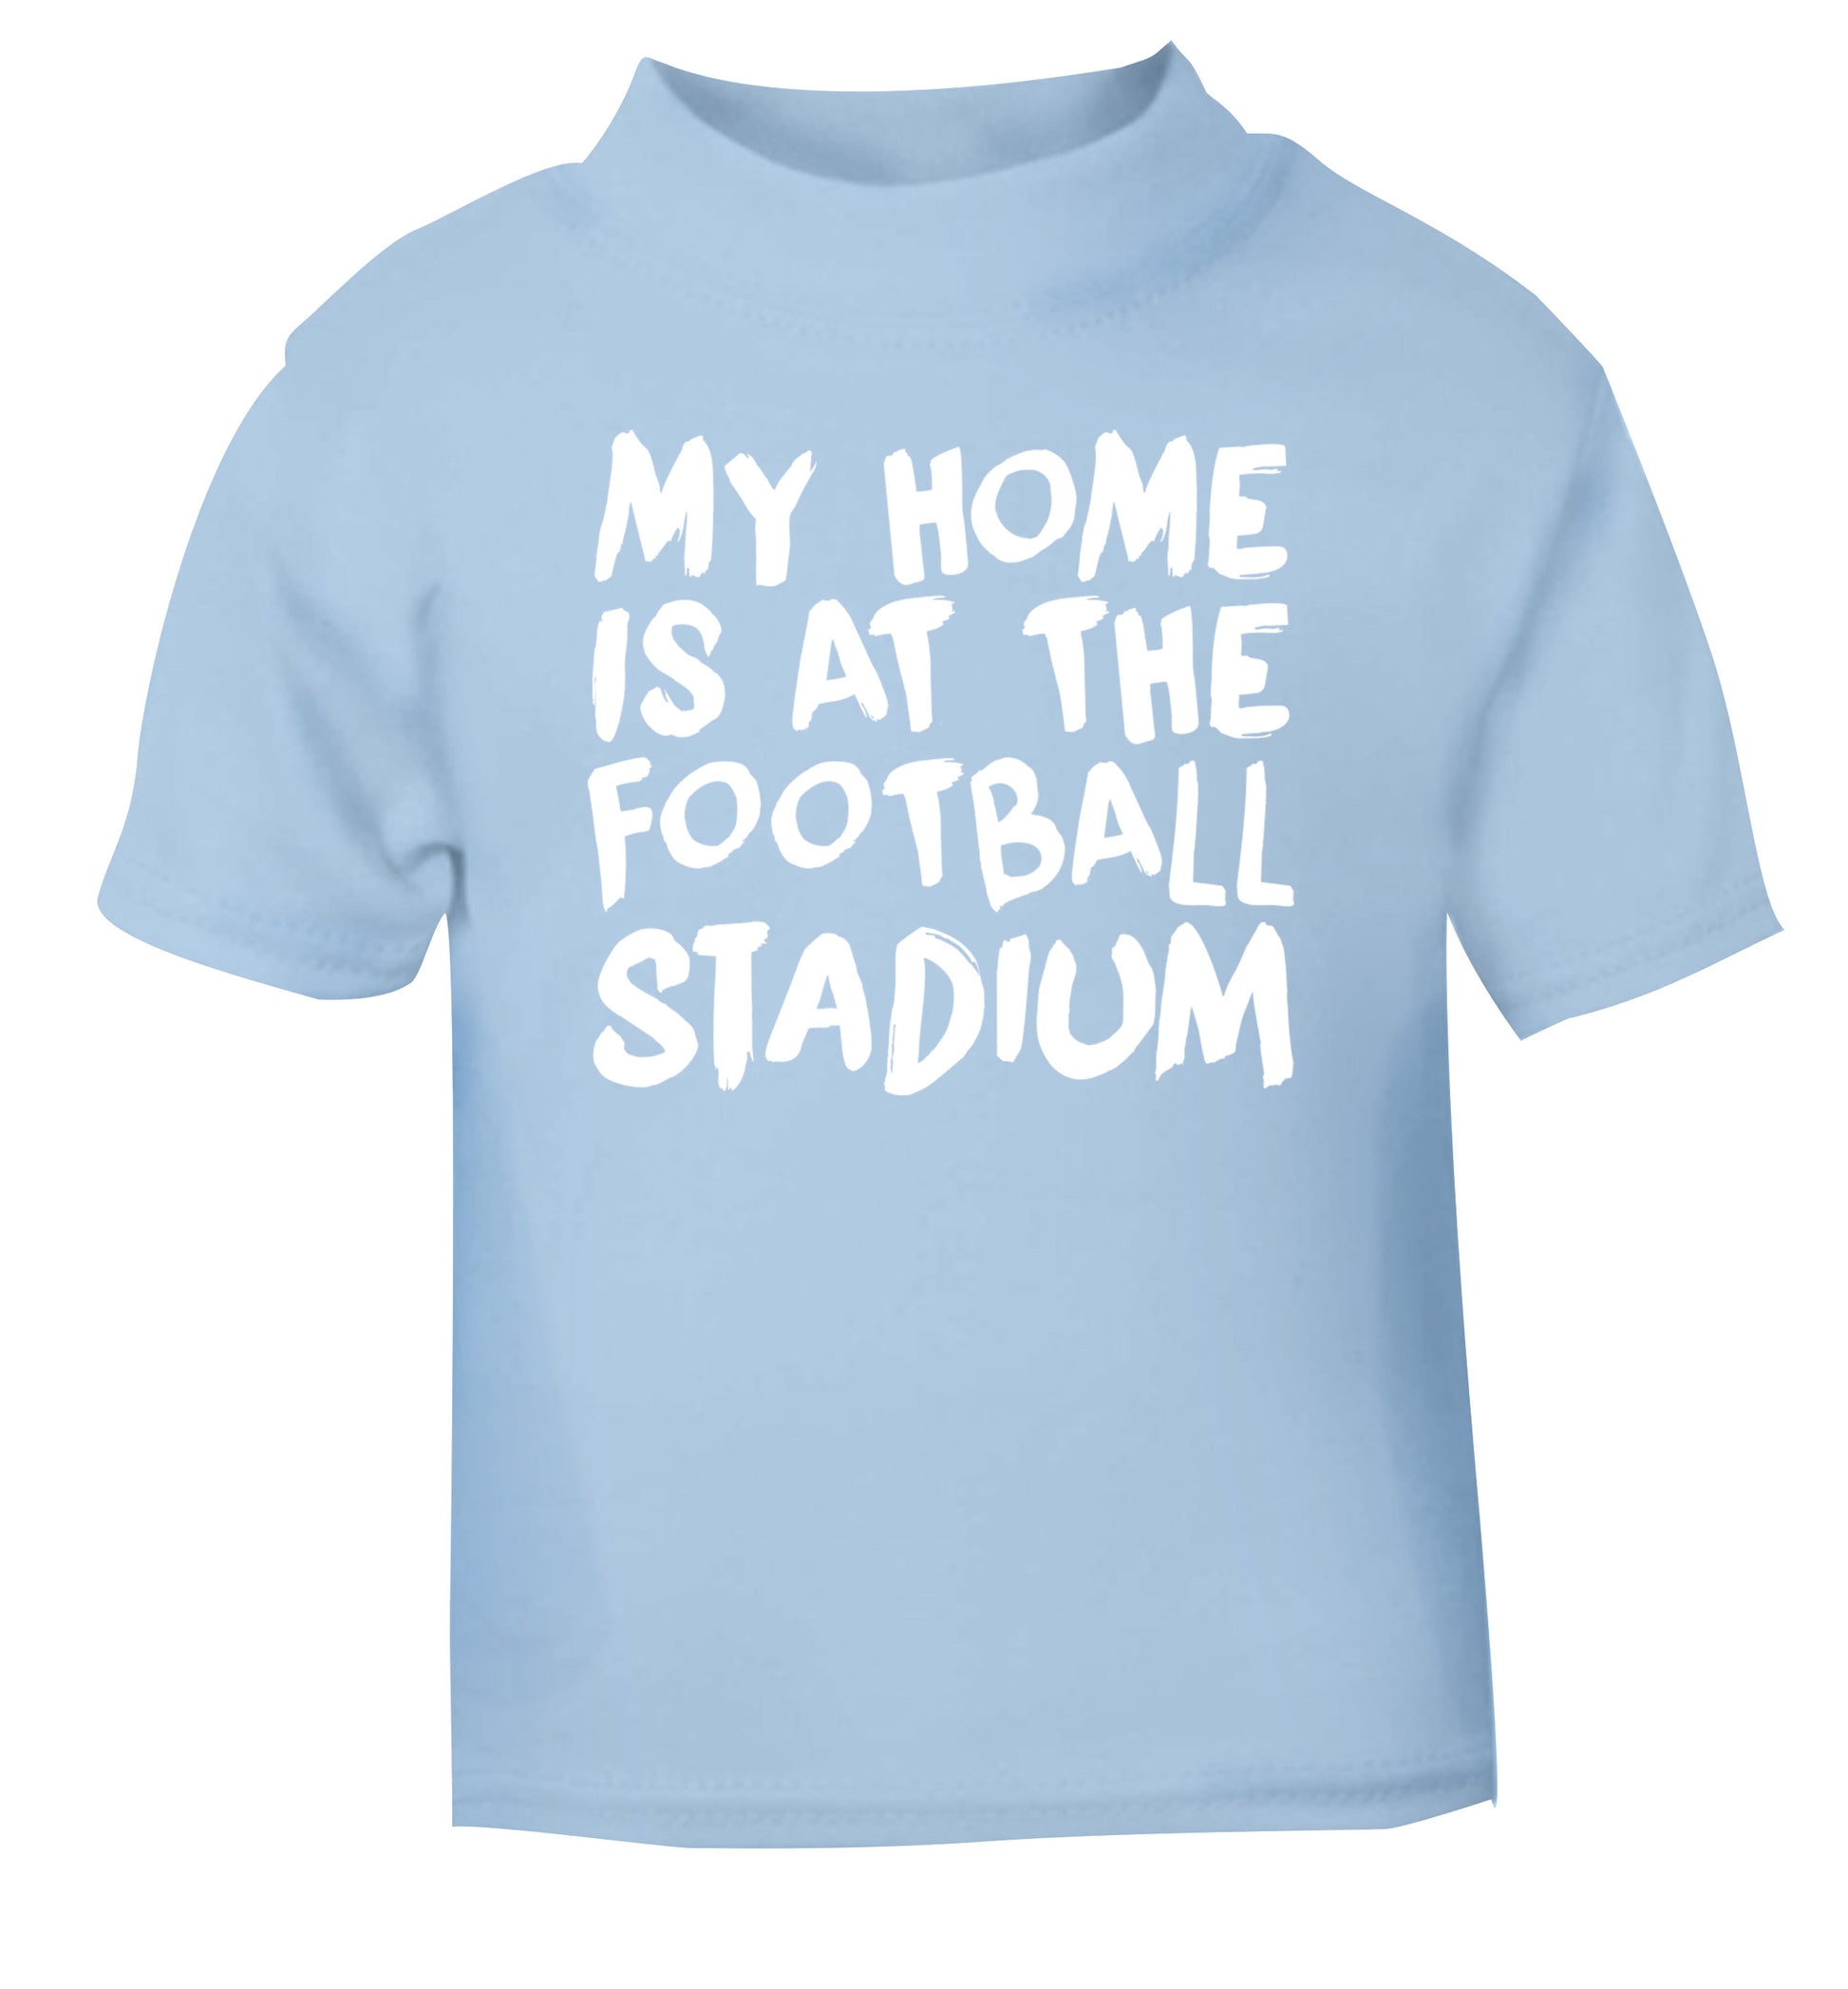 My home is at the football stadium light blue Baby Toddler Tshirt 2 Years